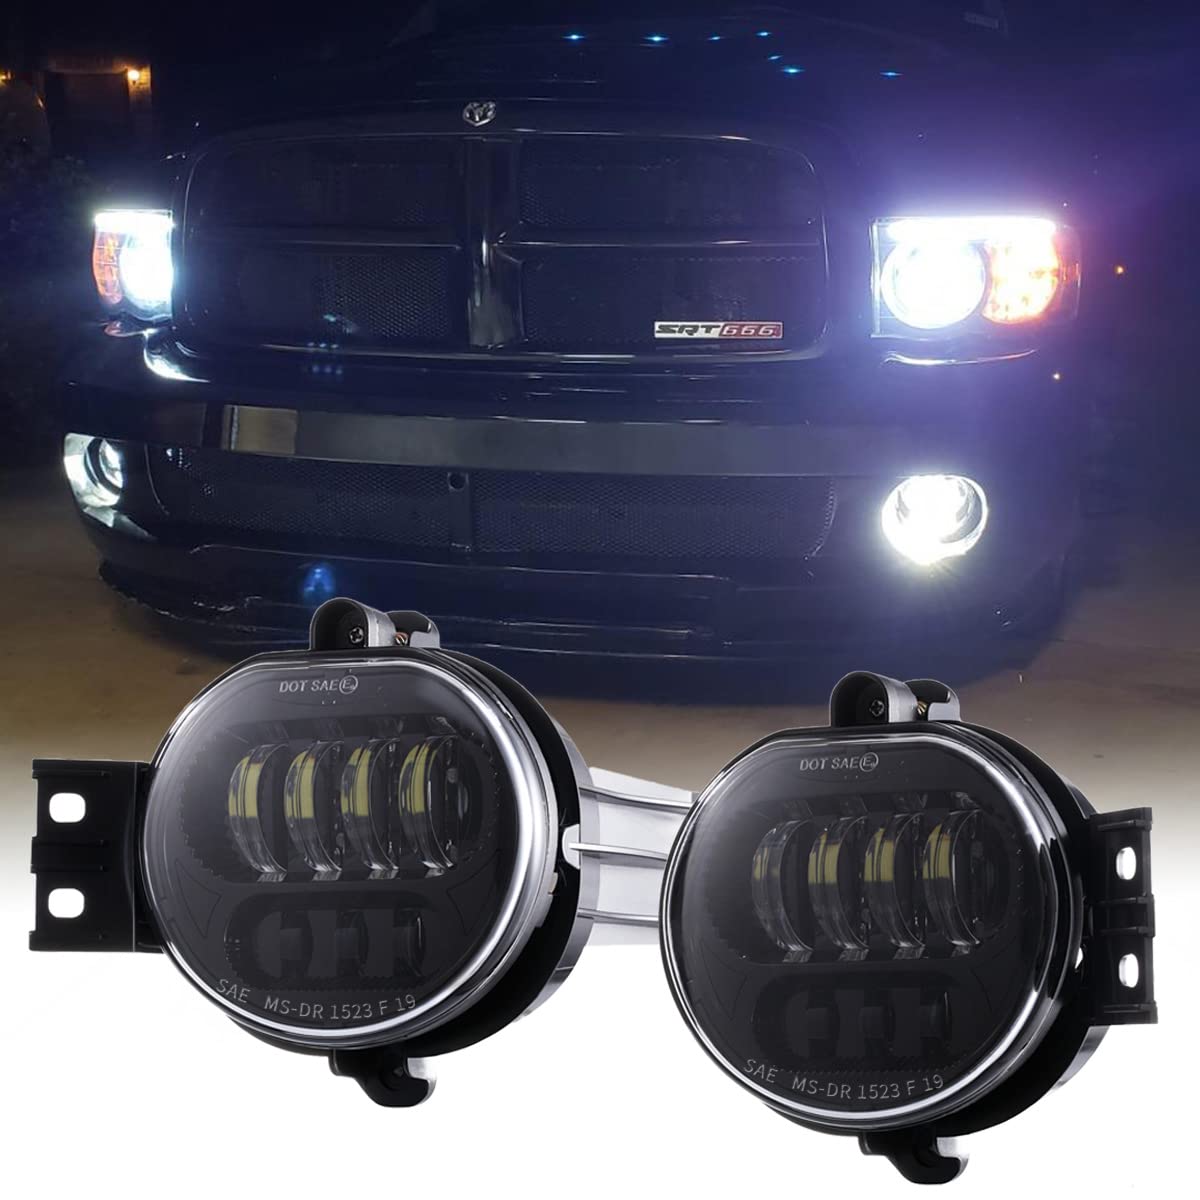 JOYSKY HD-AAA1 ZIHANGPS4 コントローラー ワイヤレス 最新 Z-OFFROAD 2pcs 63W LED Fog Lights Lamps Replacement for